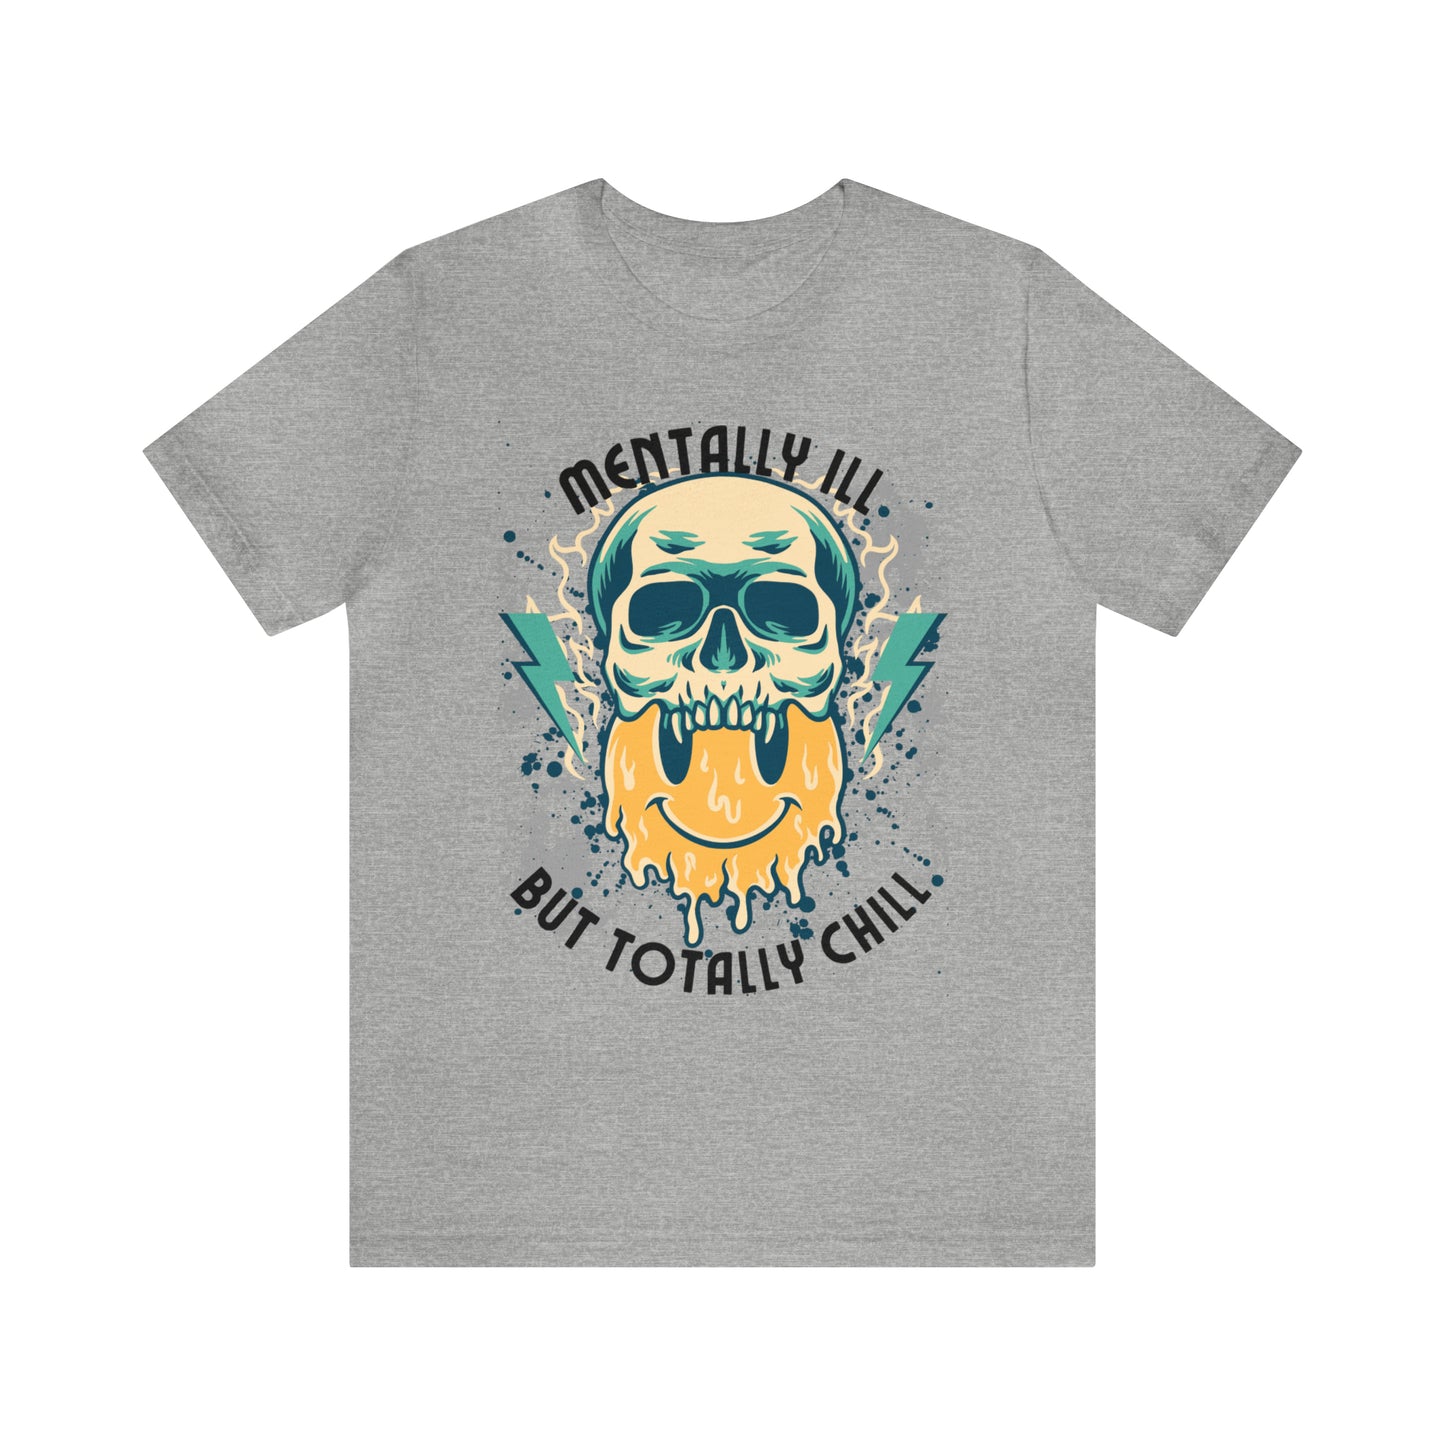 "Mentally Ill, But Totally Chill" Bella Canvas Short Sleeve Tee